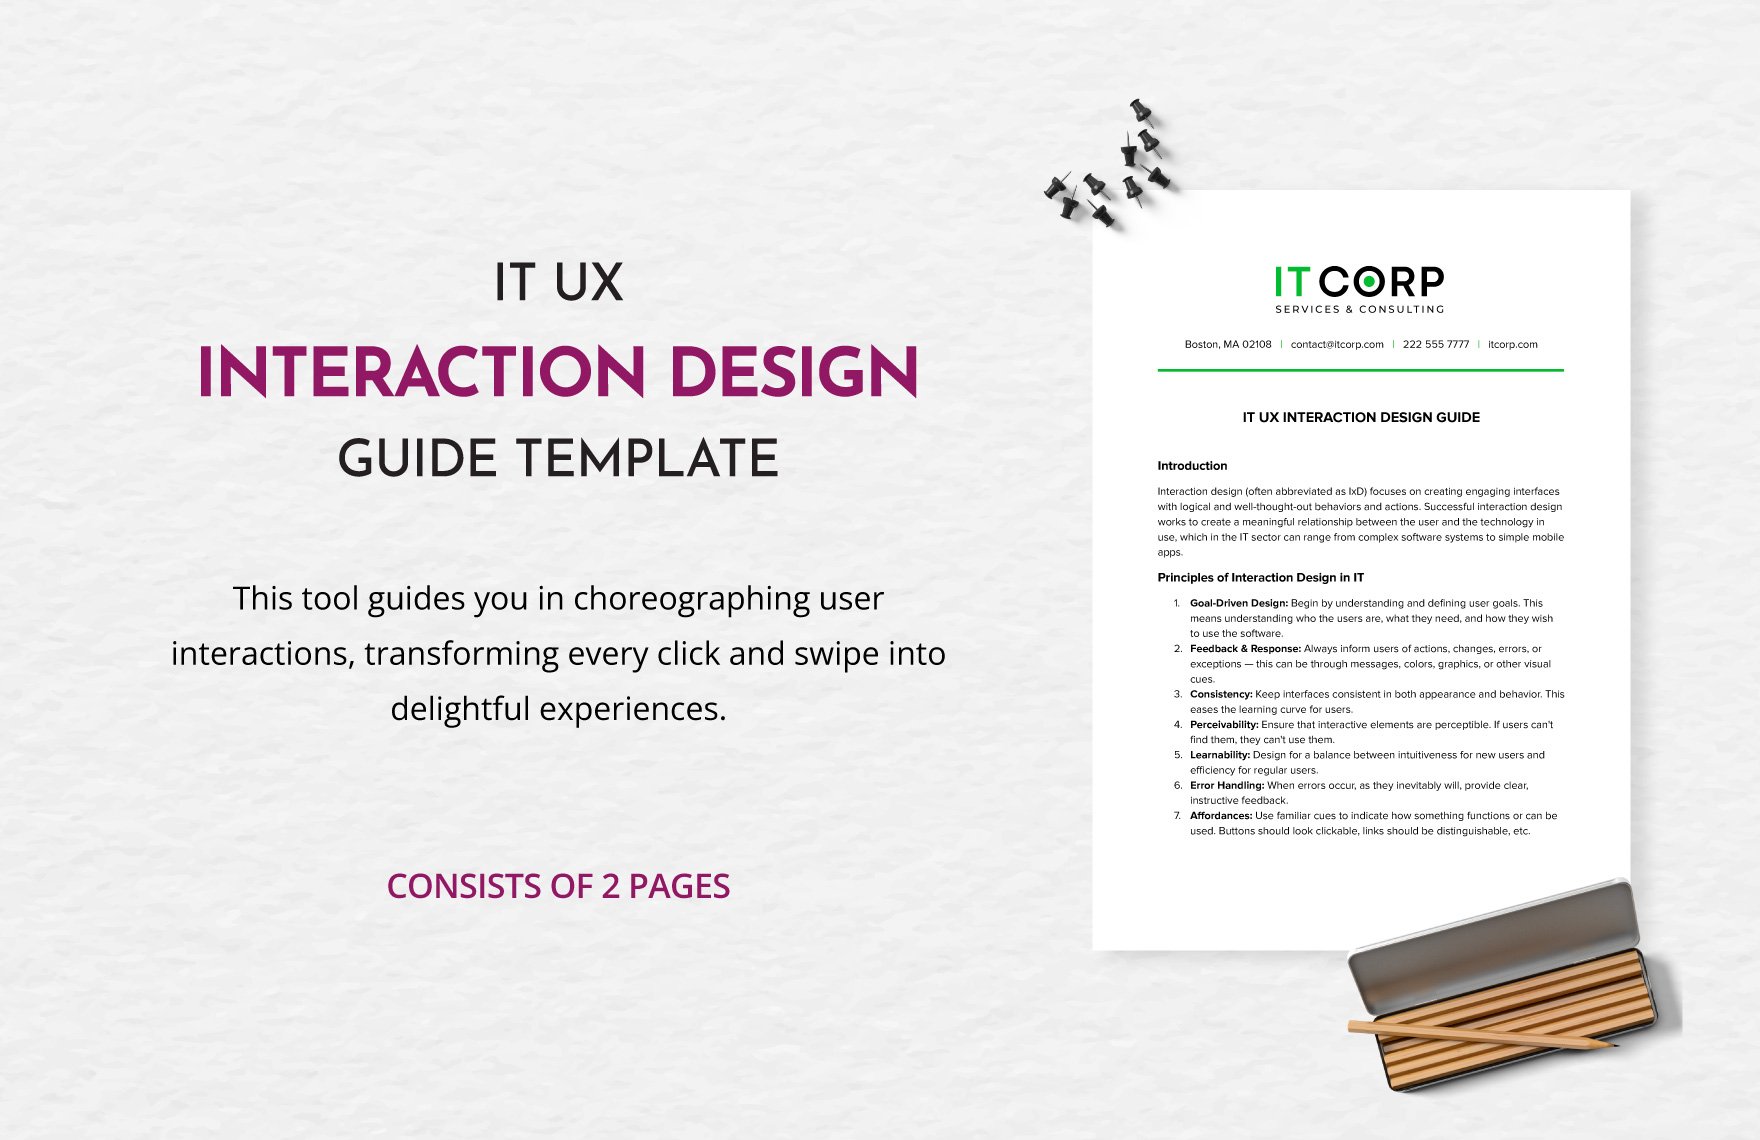 IT UX Interaction Design Guide Template in Word, Google Docs, PDF